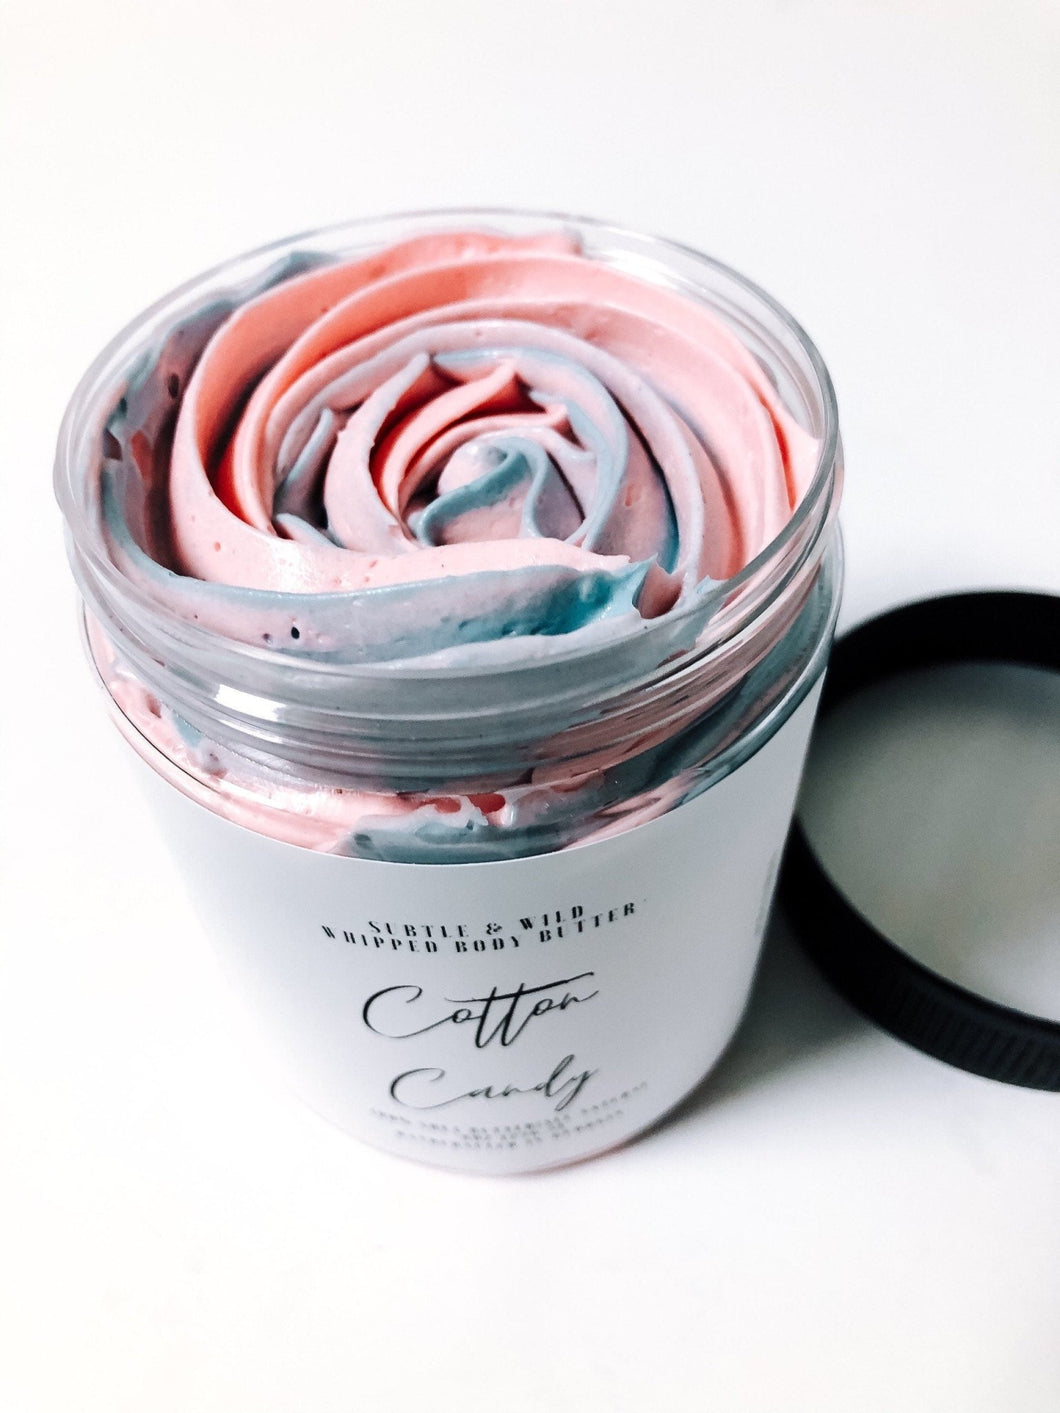 Wholesale Cotton Candy 4 oz Body Butters - Subtle and Wild